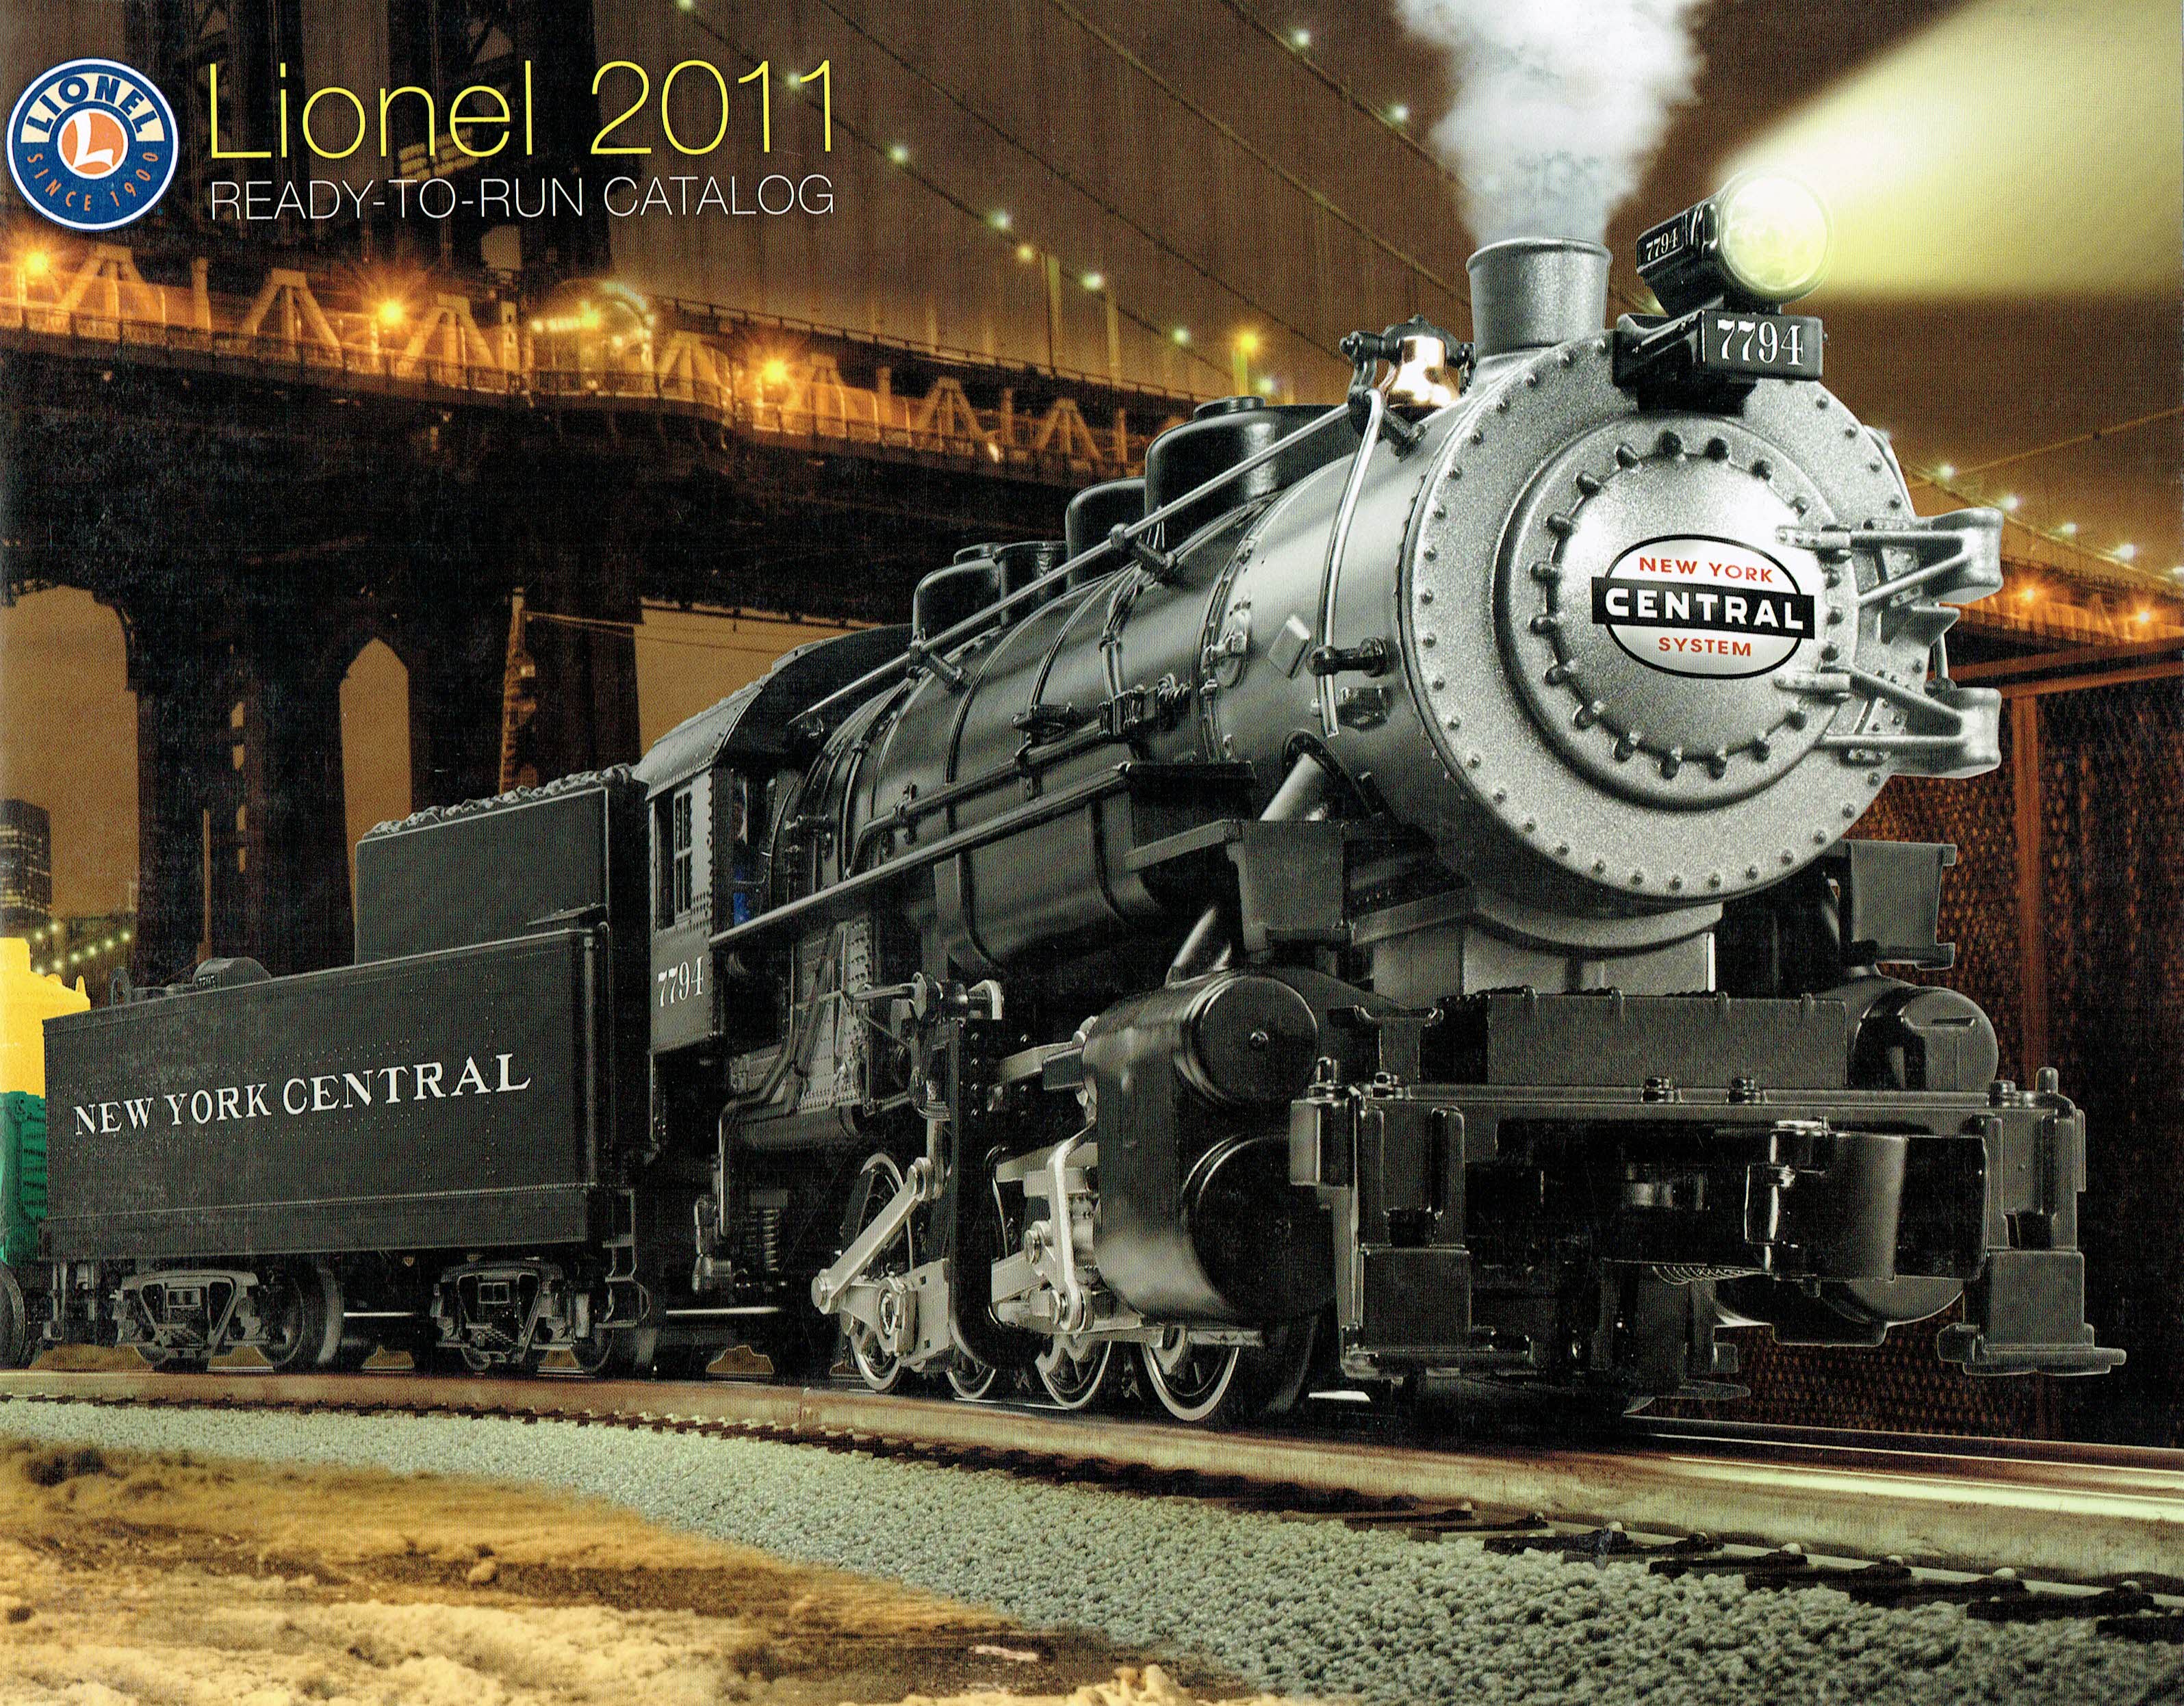 Lionel 2011 Ready-to-Run Catalog image